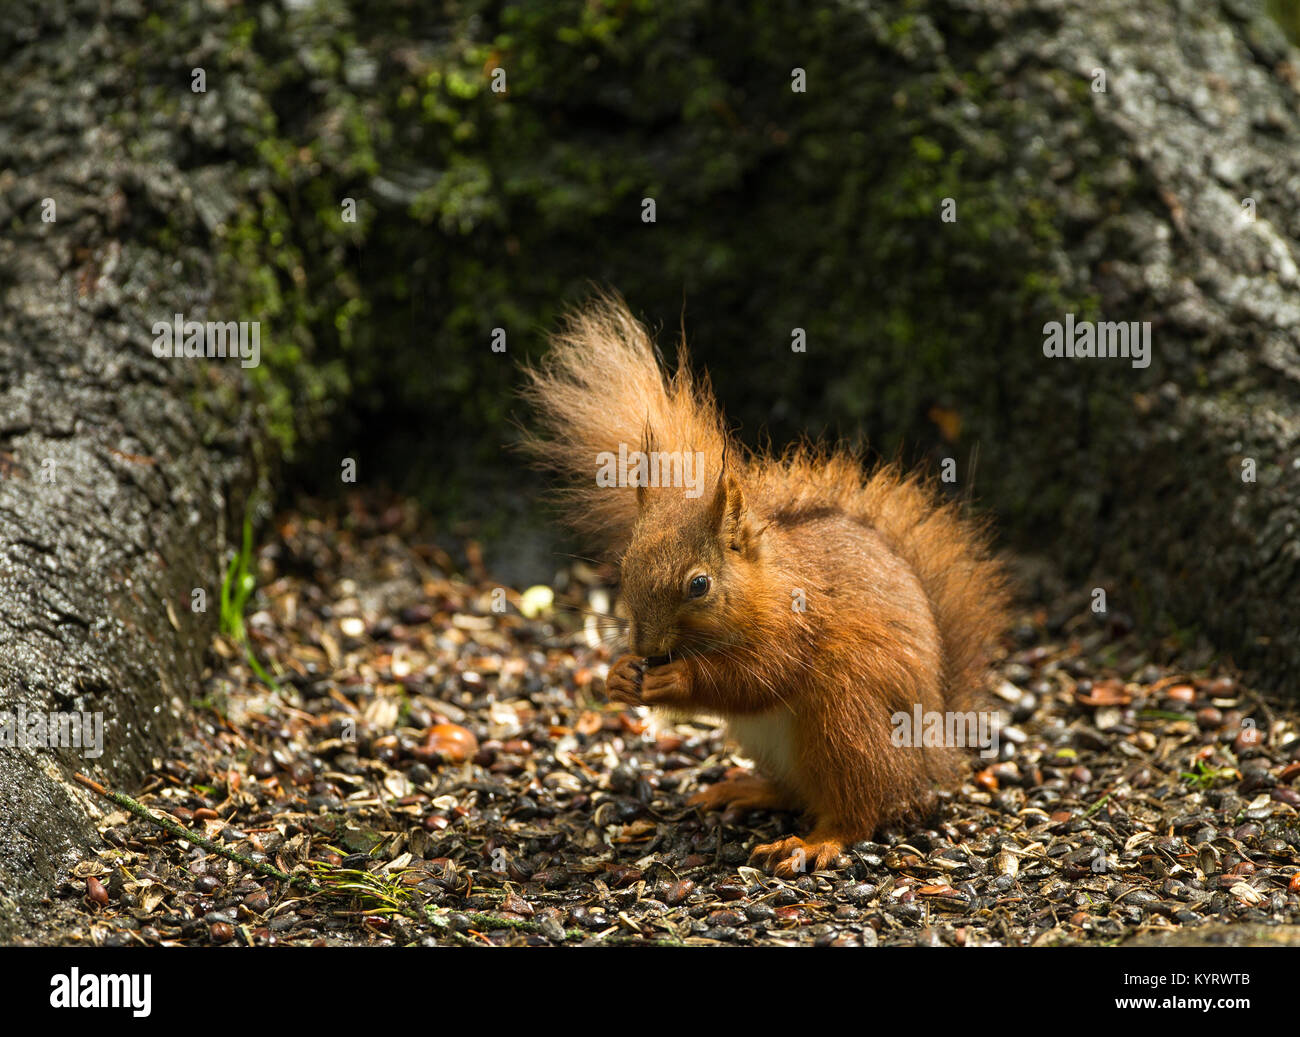 Red squirrel eating nuts after a heavy rain storm Stock Photo